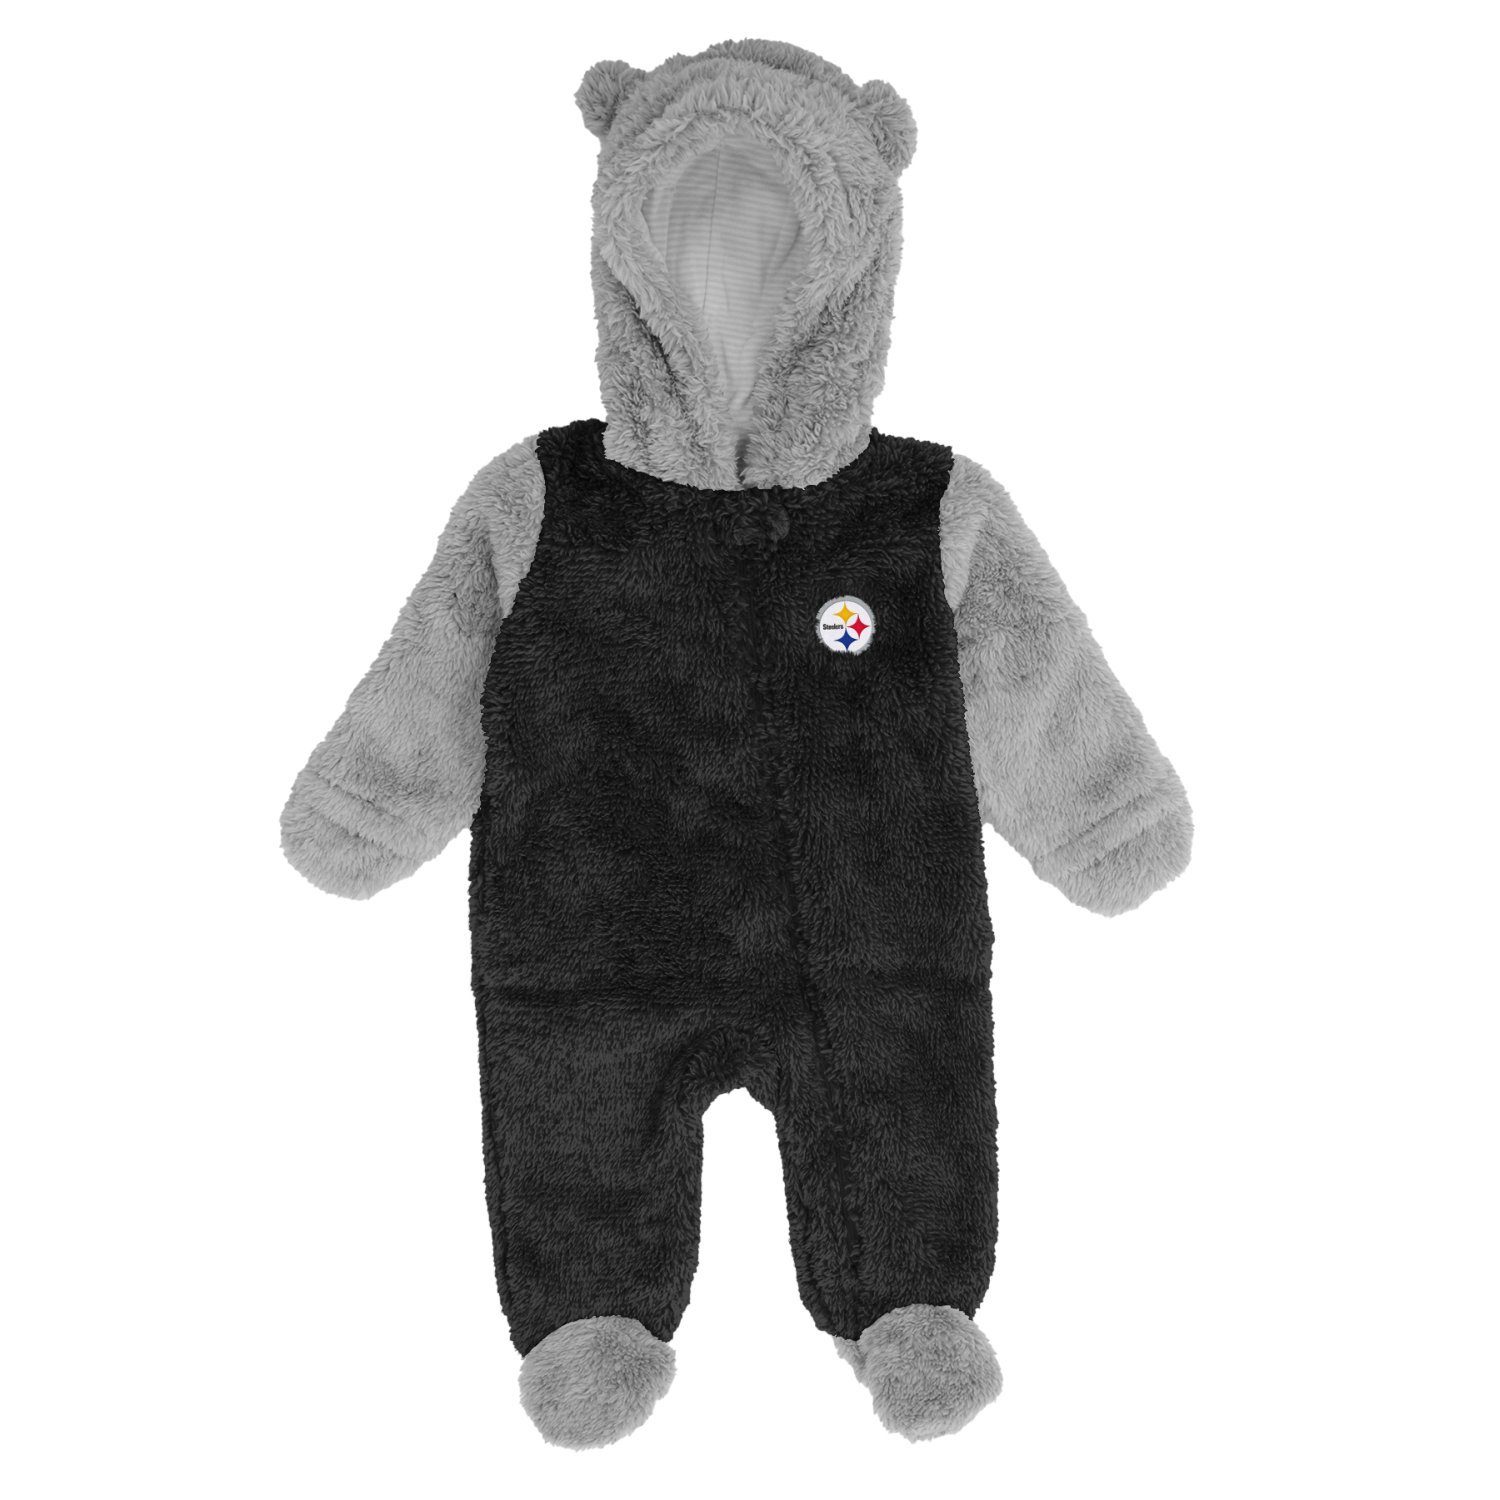 Outerstuff Kapuzenpullover NFL Teddy Overall Pittsburgh Steelers